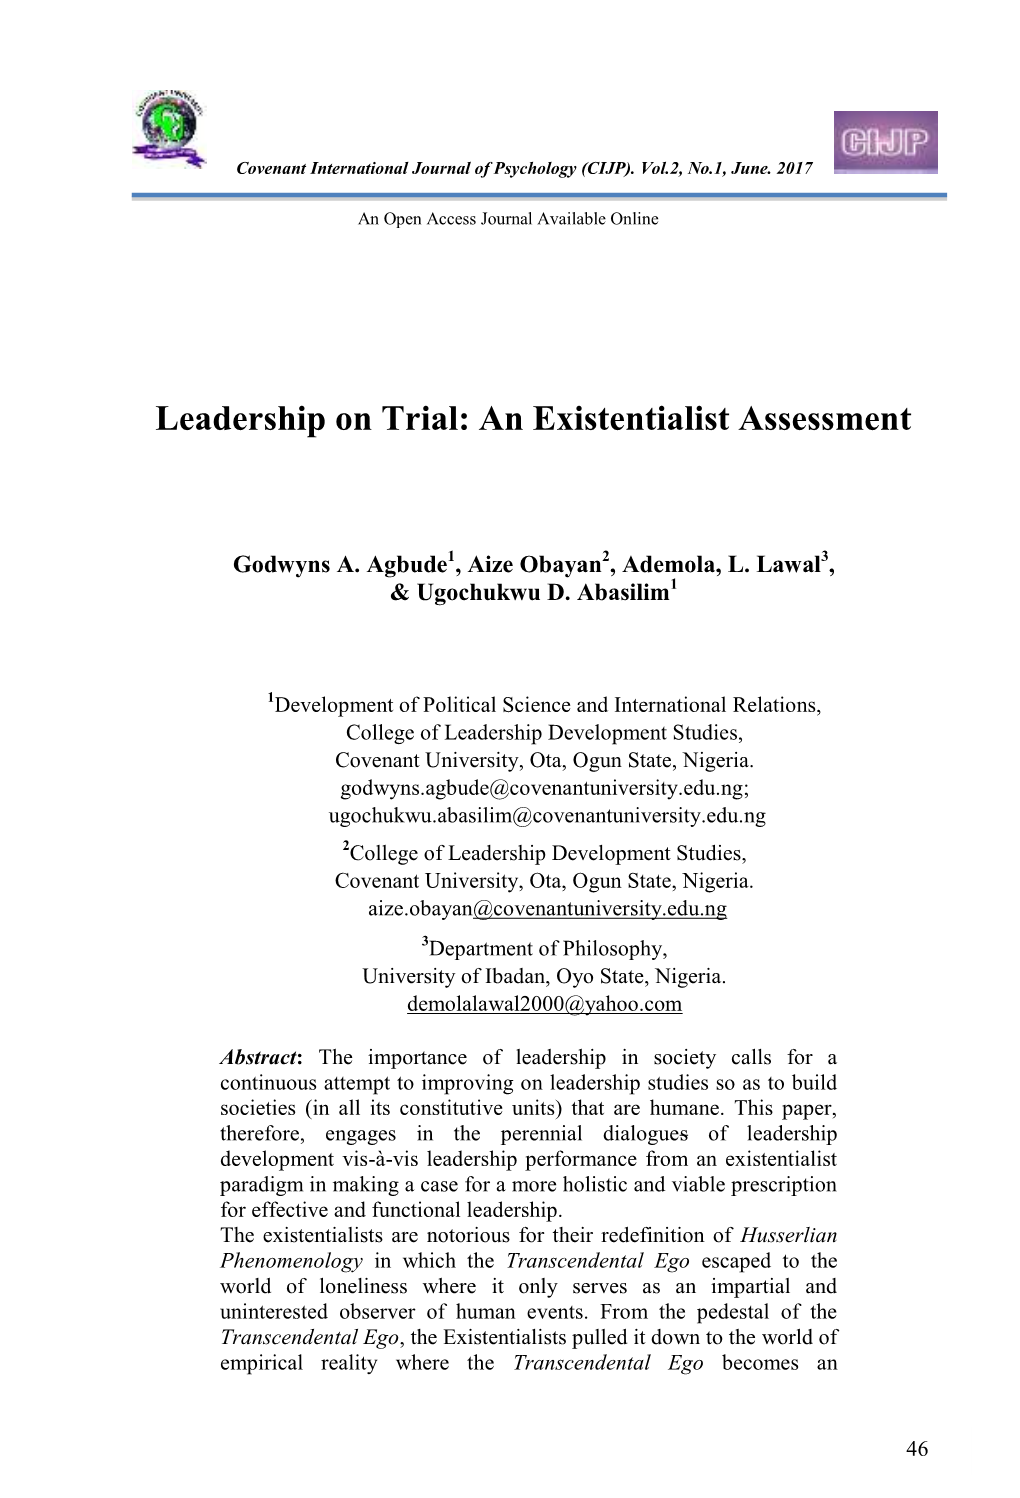 Leadership on Trial: an Existentialist Assessment